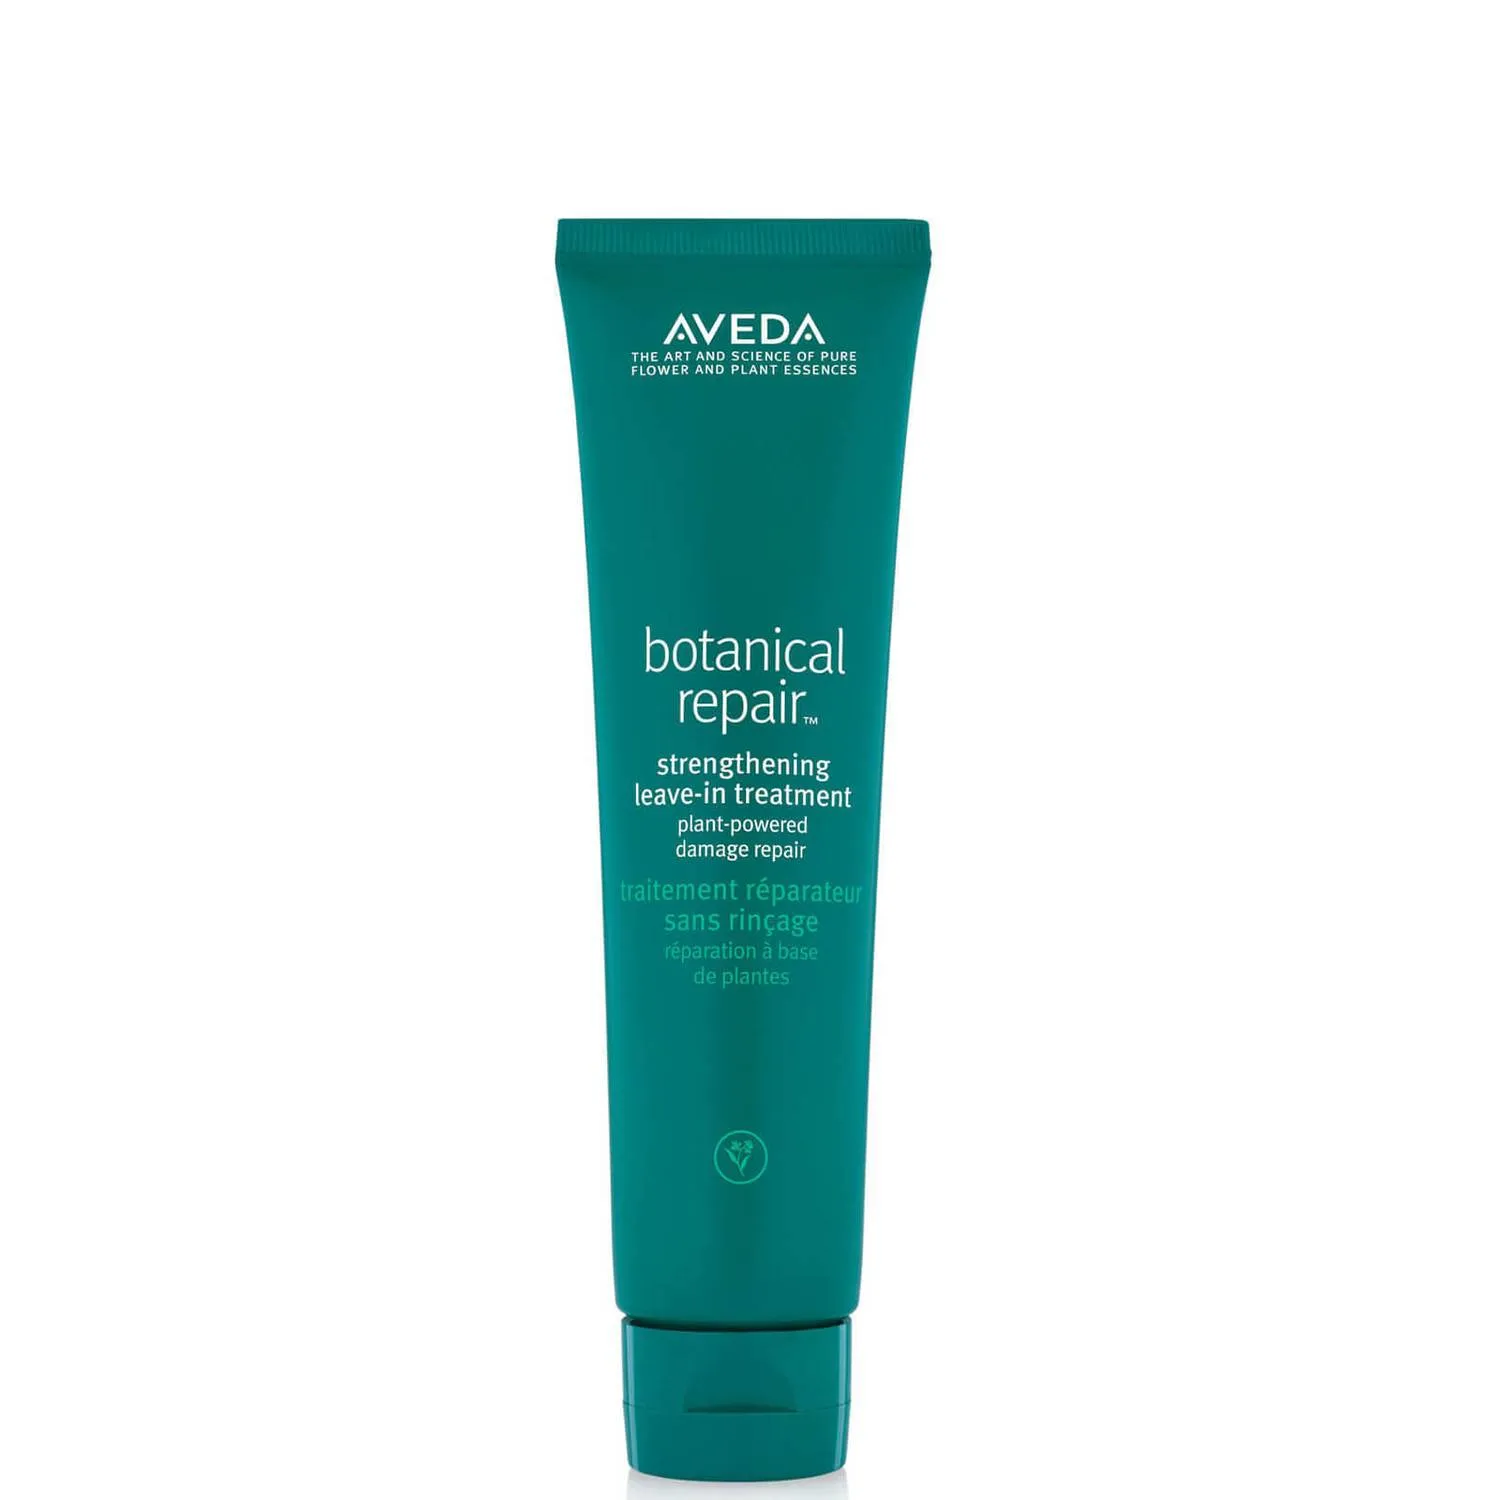 A tied FEMMENORDIC's choice in the Aveda vs Kerastase treatment comparison, Aveda Botanical Repair Strengthening Leave-in Treatment